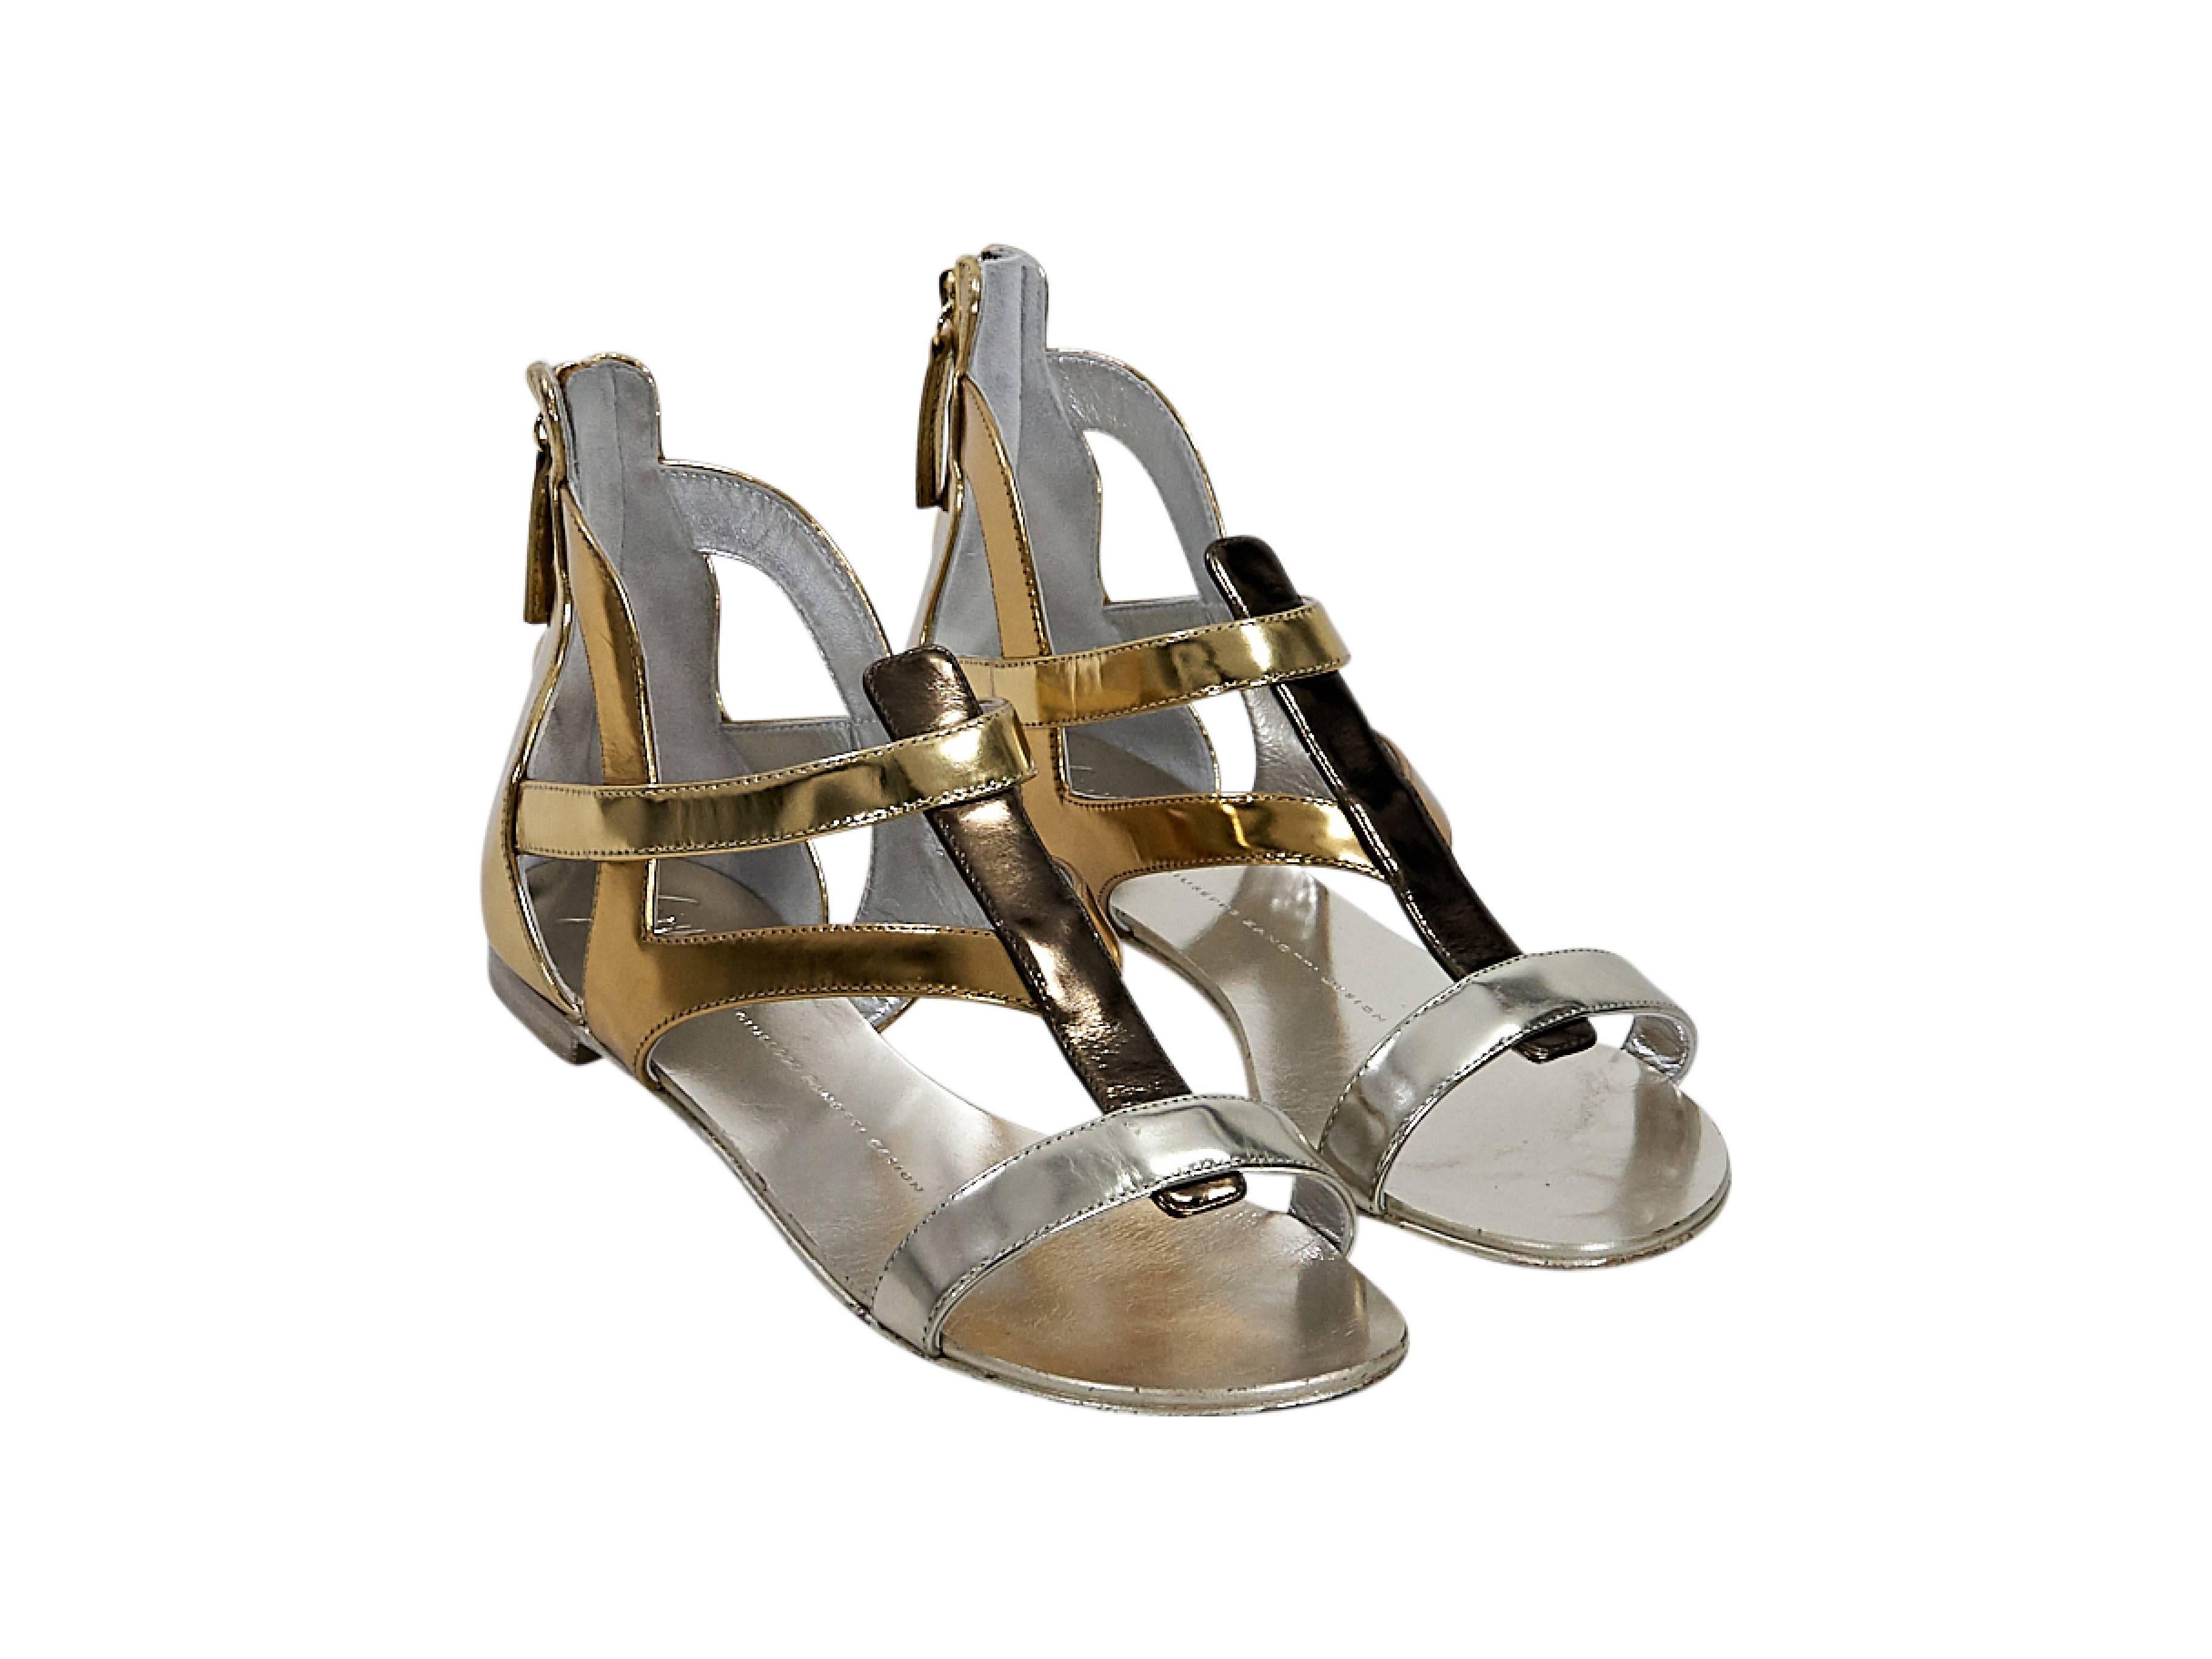 Product details:  Multicolor metallic leather gladiator sandals by Giuseppe Zanotti.  Open toe.  Back zip closure.  Size 7
Condition: Pre-owned. Very good.

Est. Retail $ 598.00

